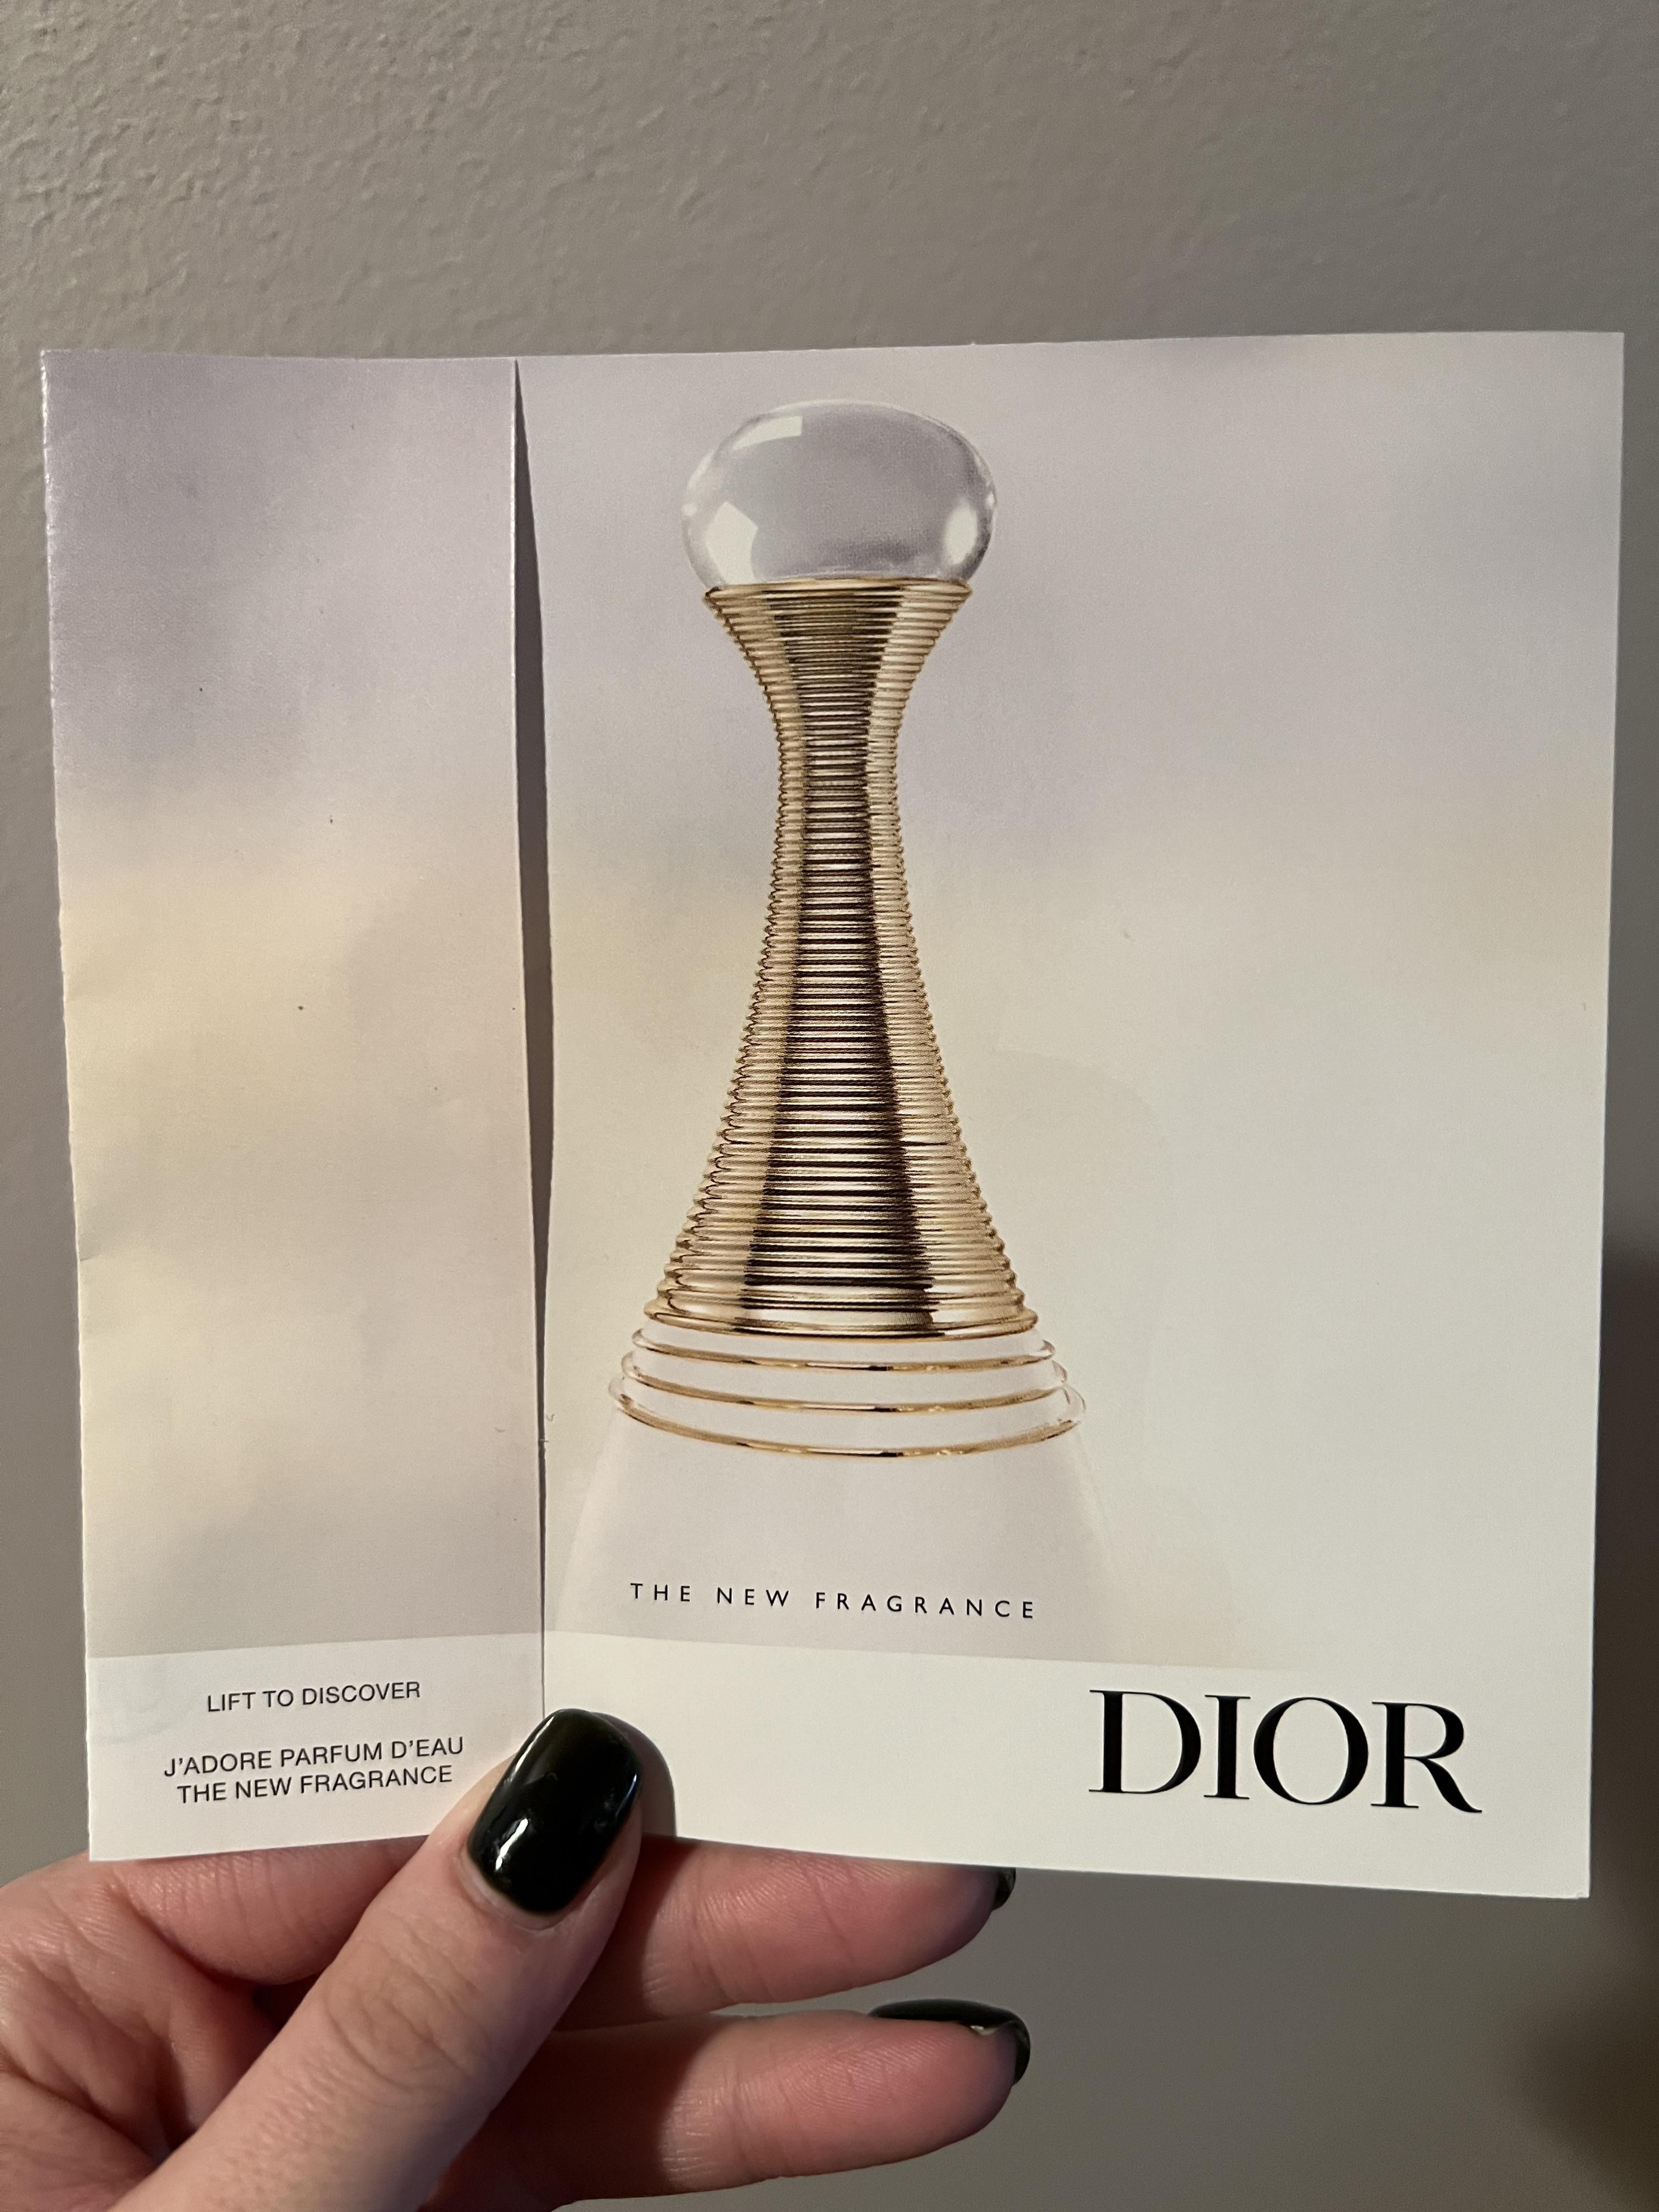 This perfume looks like a door stop. Or should I say, Dior stop?